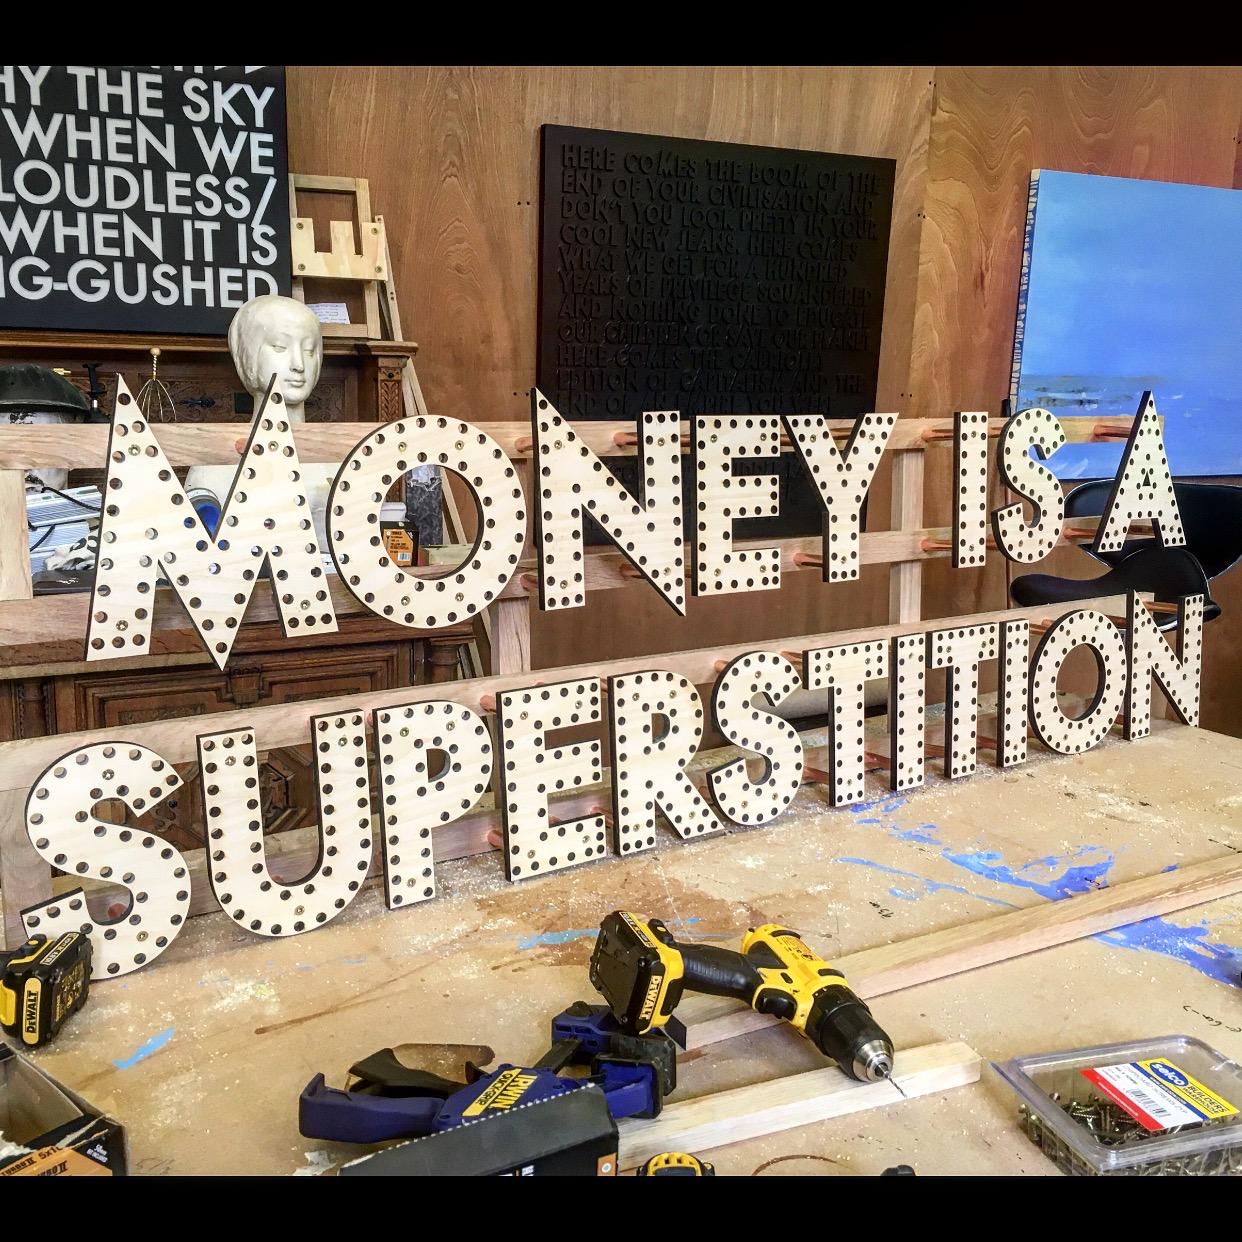 Money is a Superstition - Sculpture by Robert Montgomery